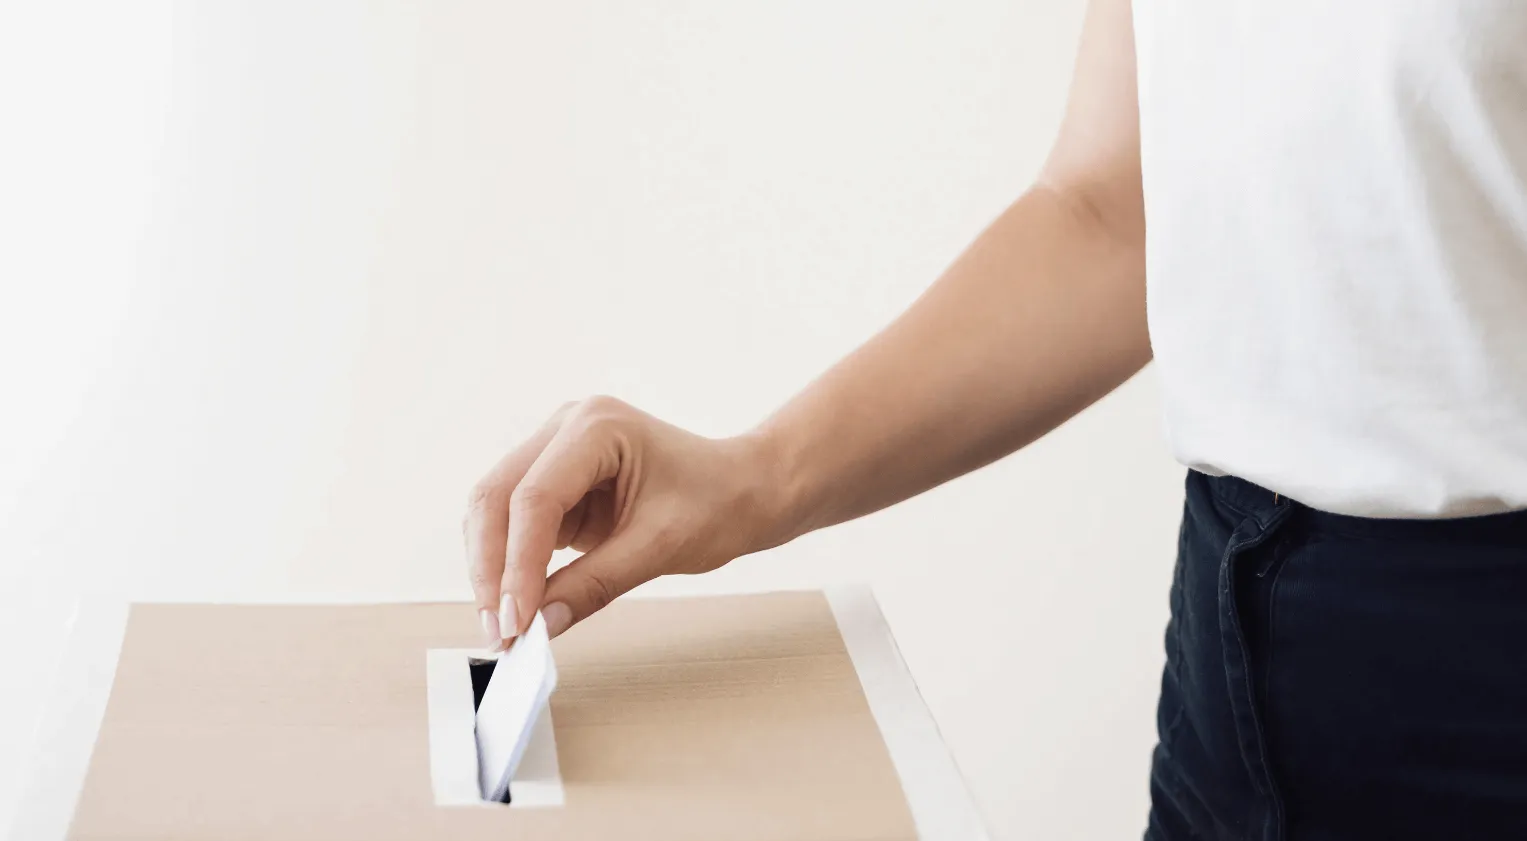 A person putting a voting ballot in a box